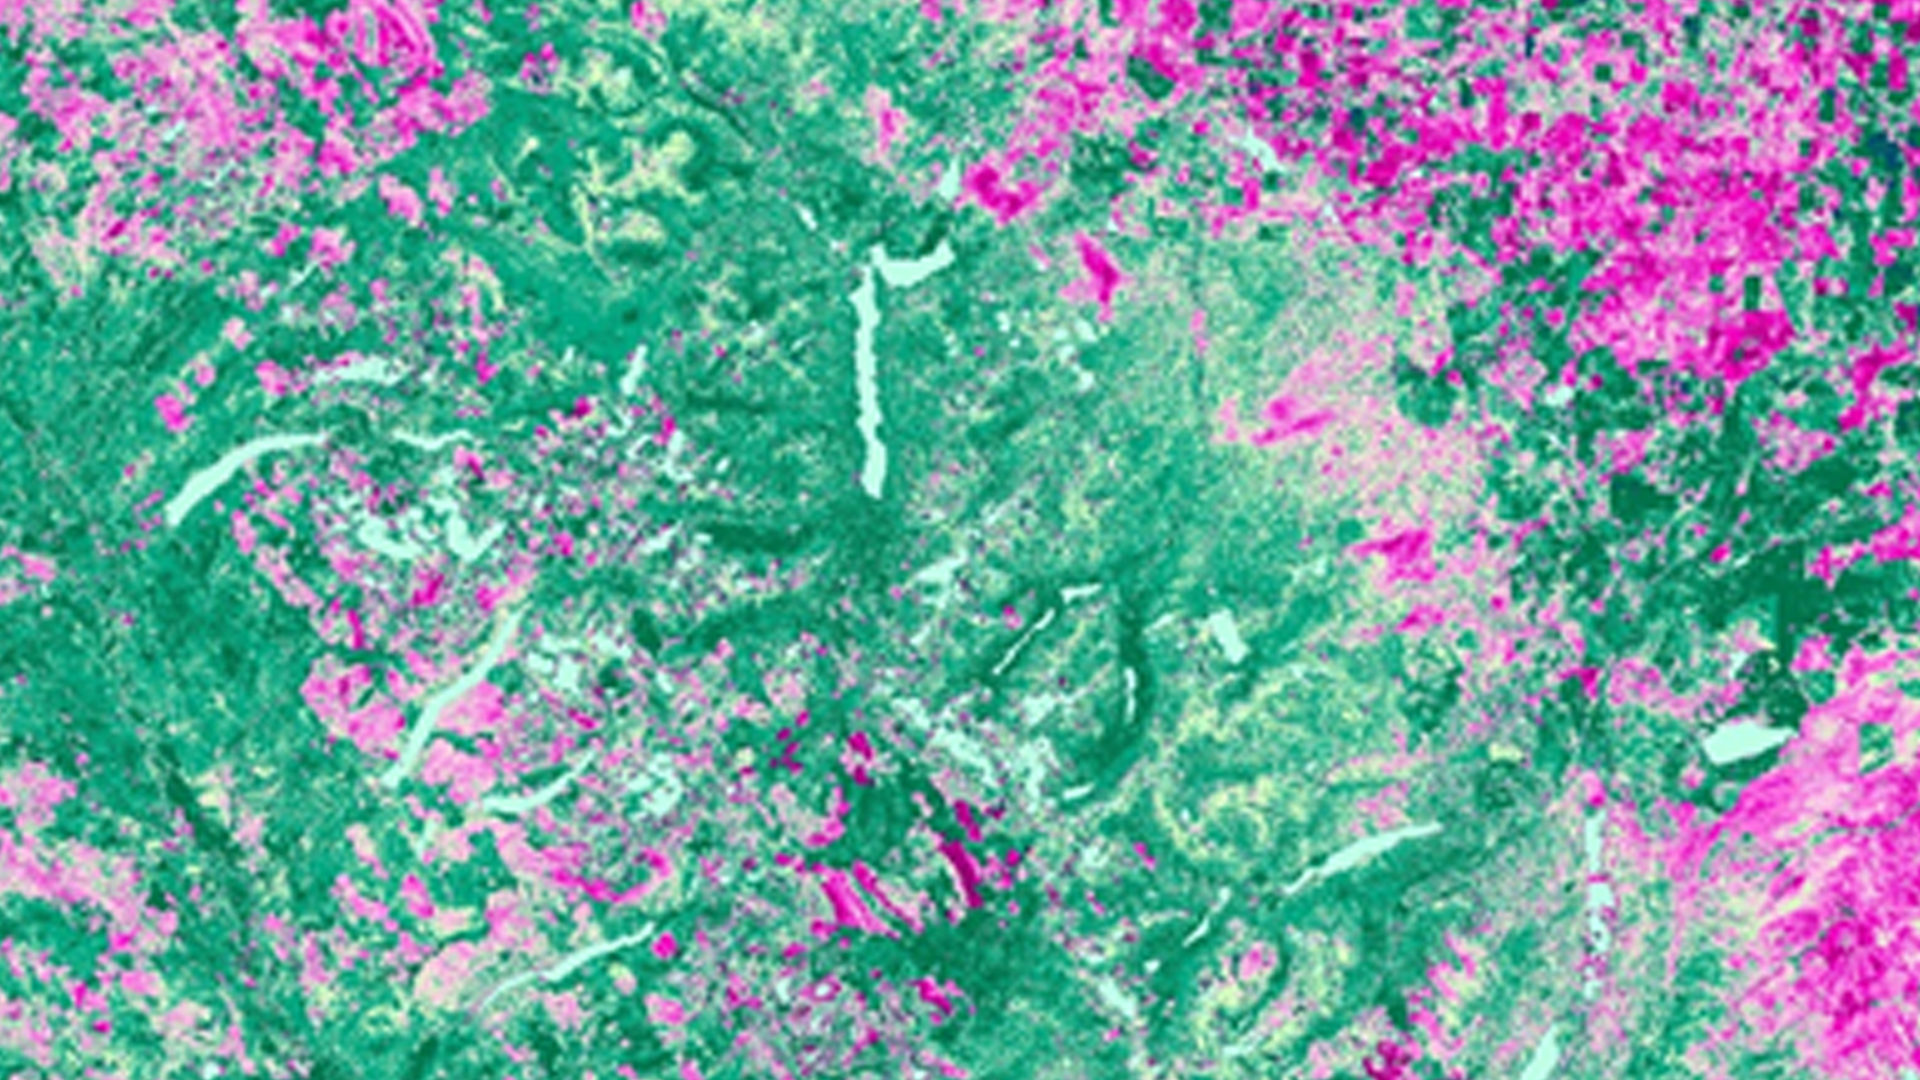 ∆NDMI image generated from Landsat 8 OLI scenes for the time period of 2014-2016. Image Credit: Glacier National Park Climate Team.